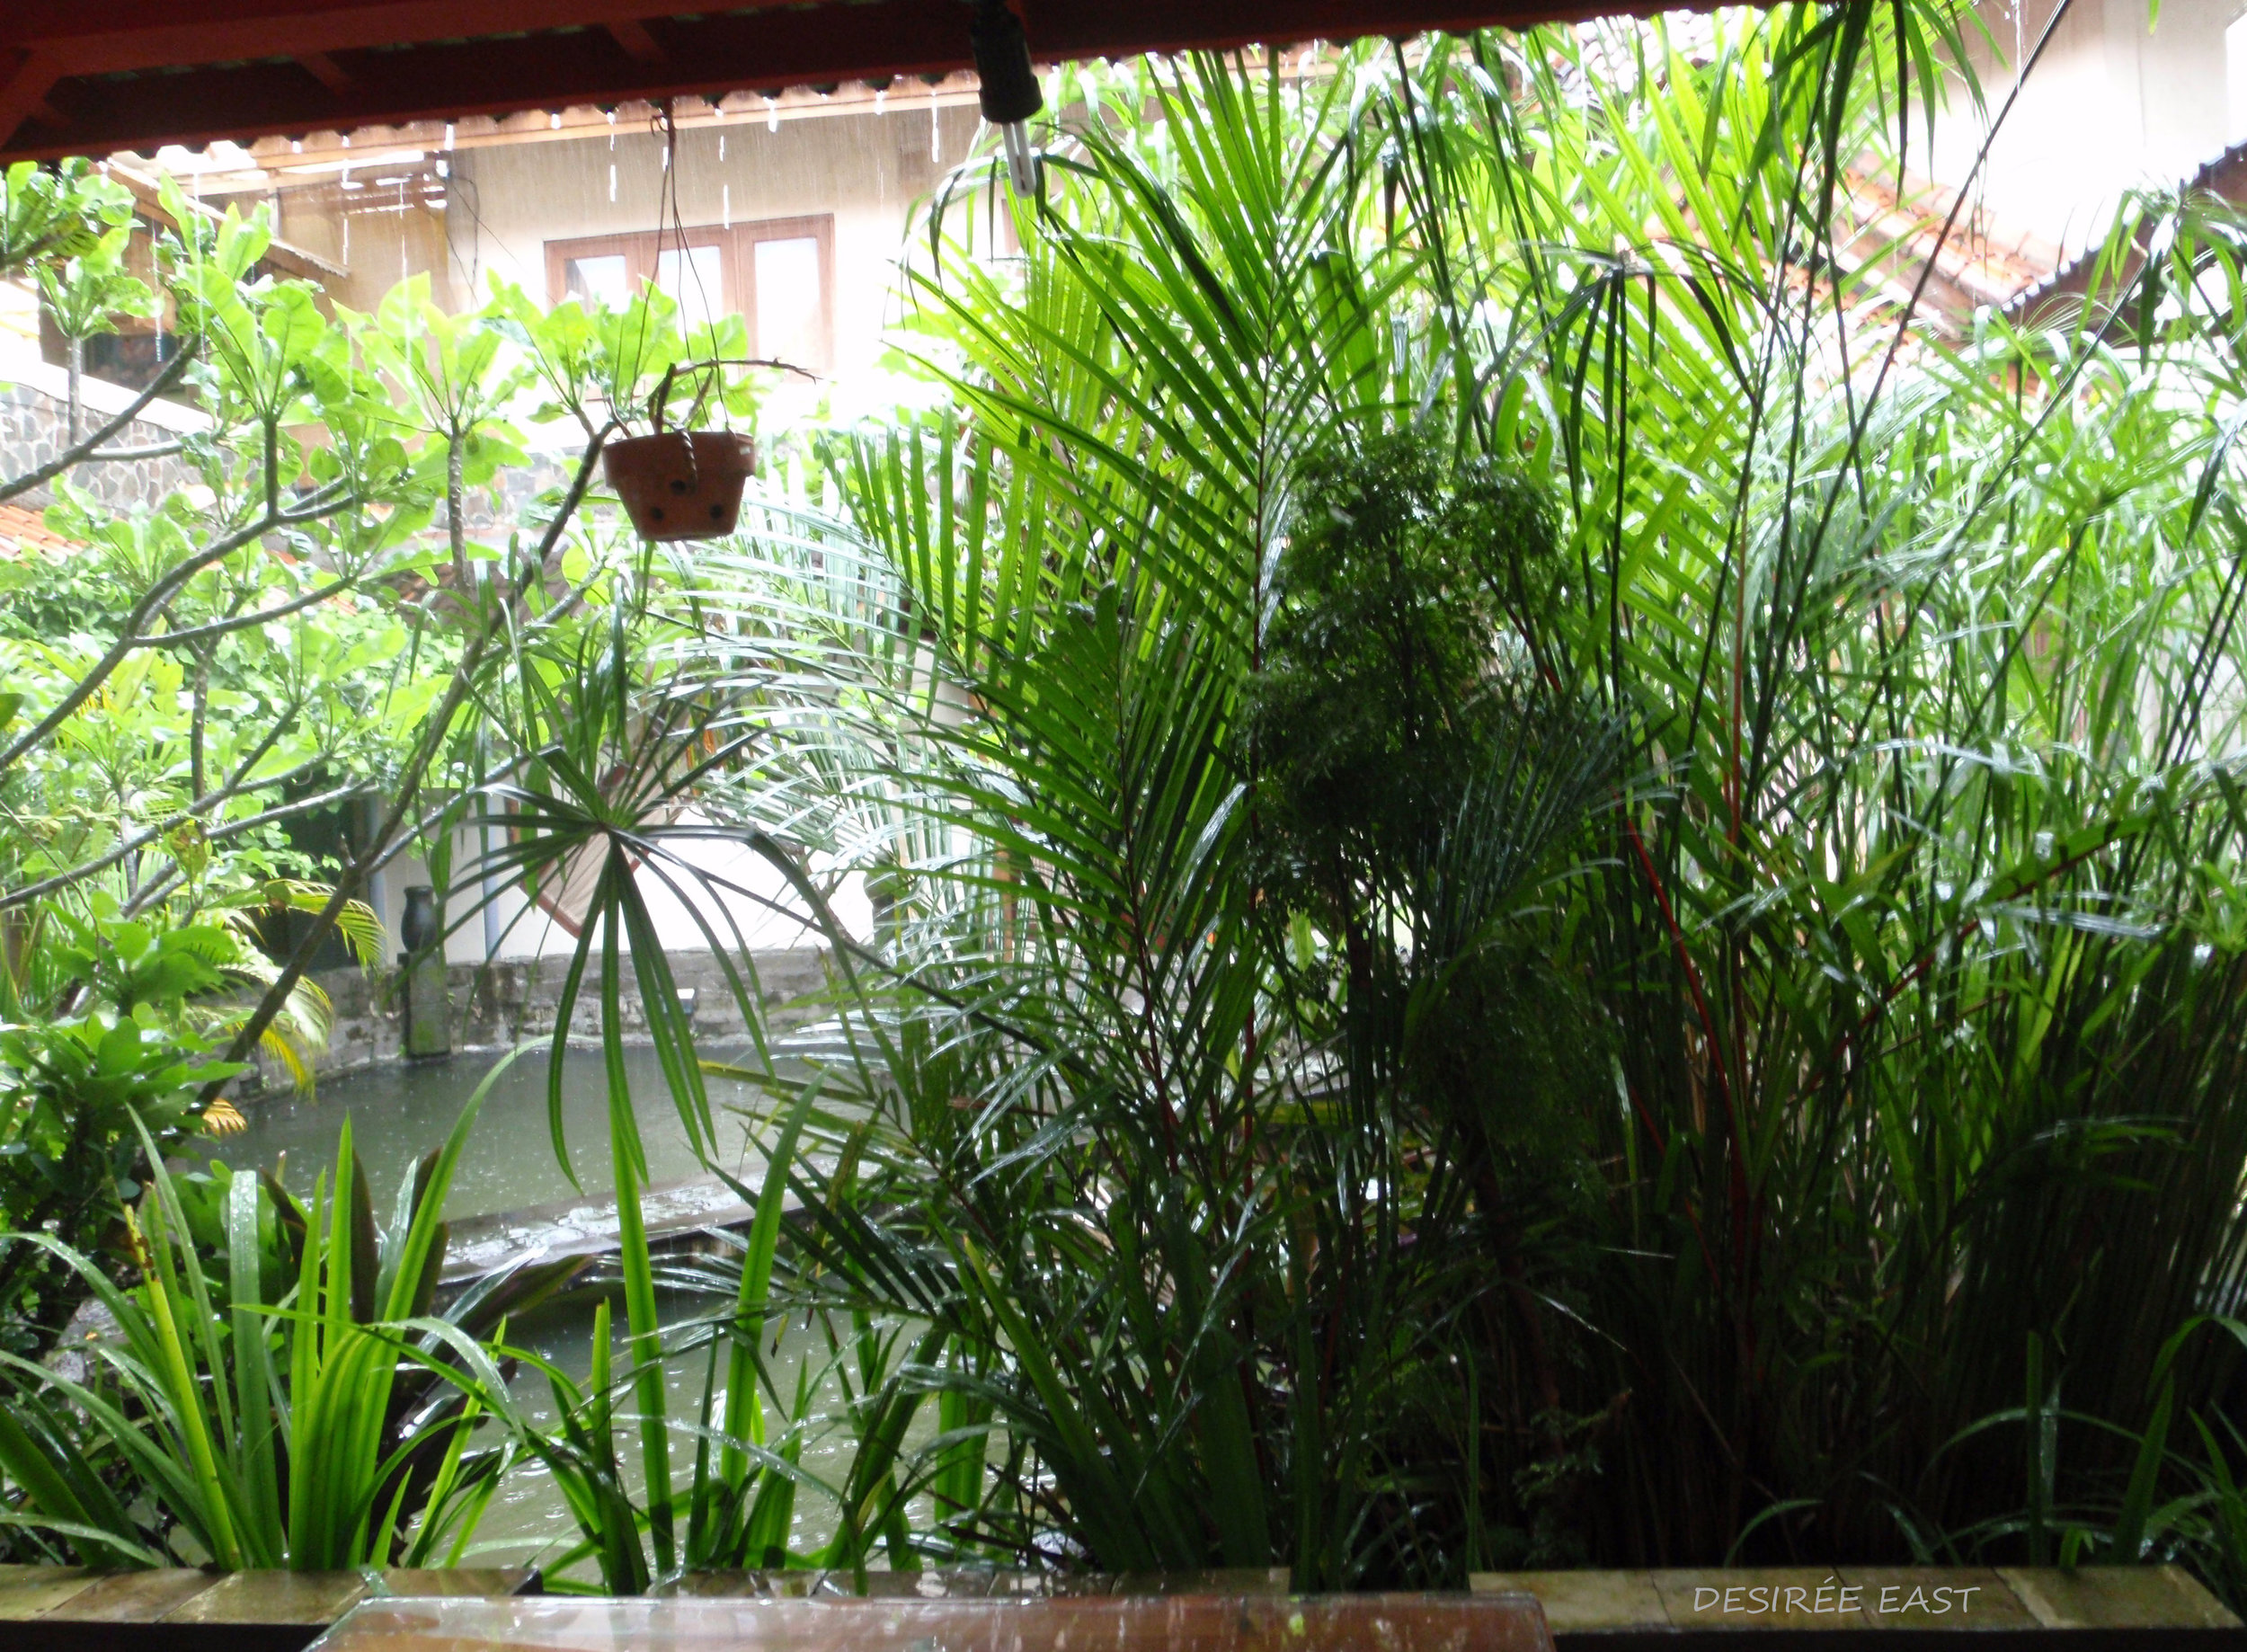 plants near the pond. andree homestay. bali, indonesia. photo by desiree east